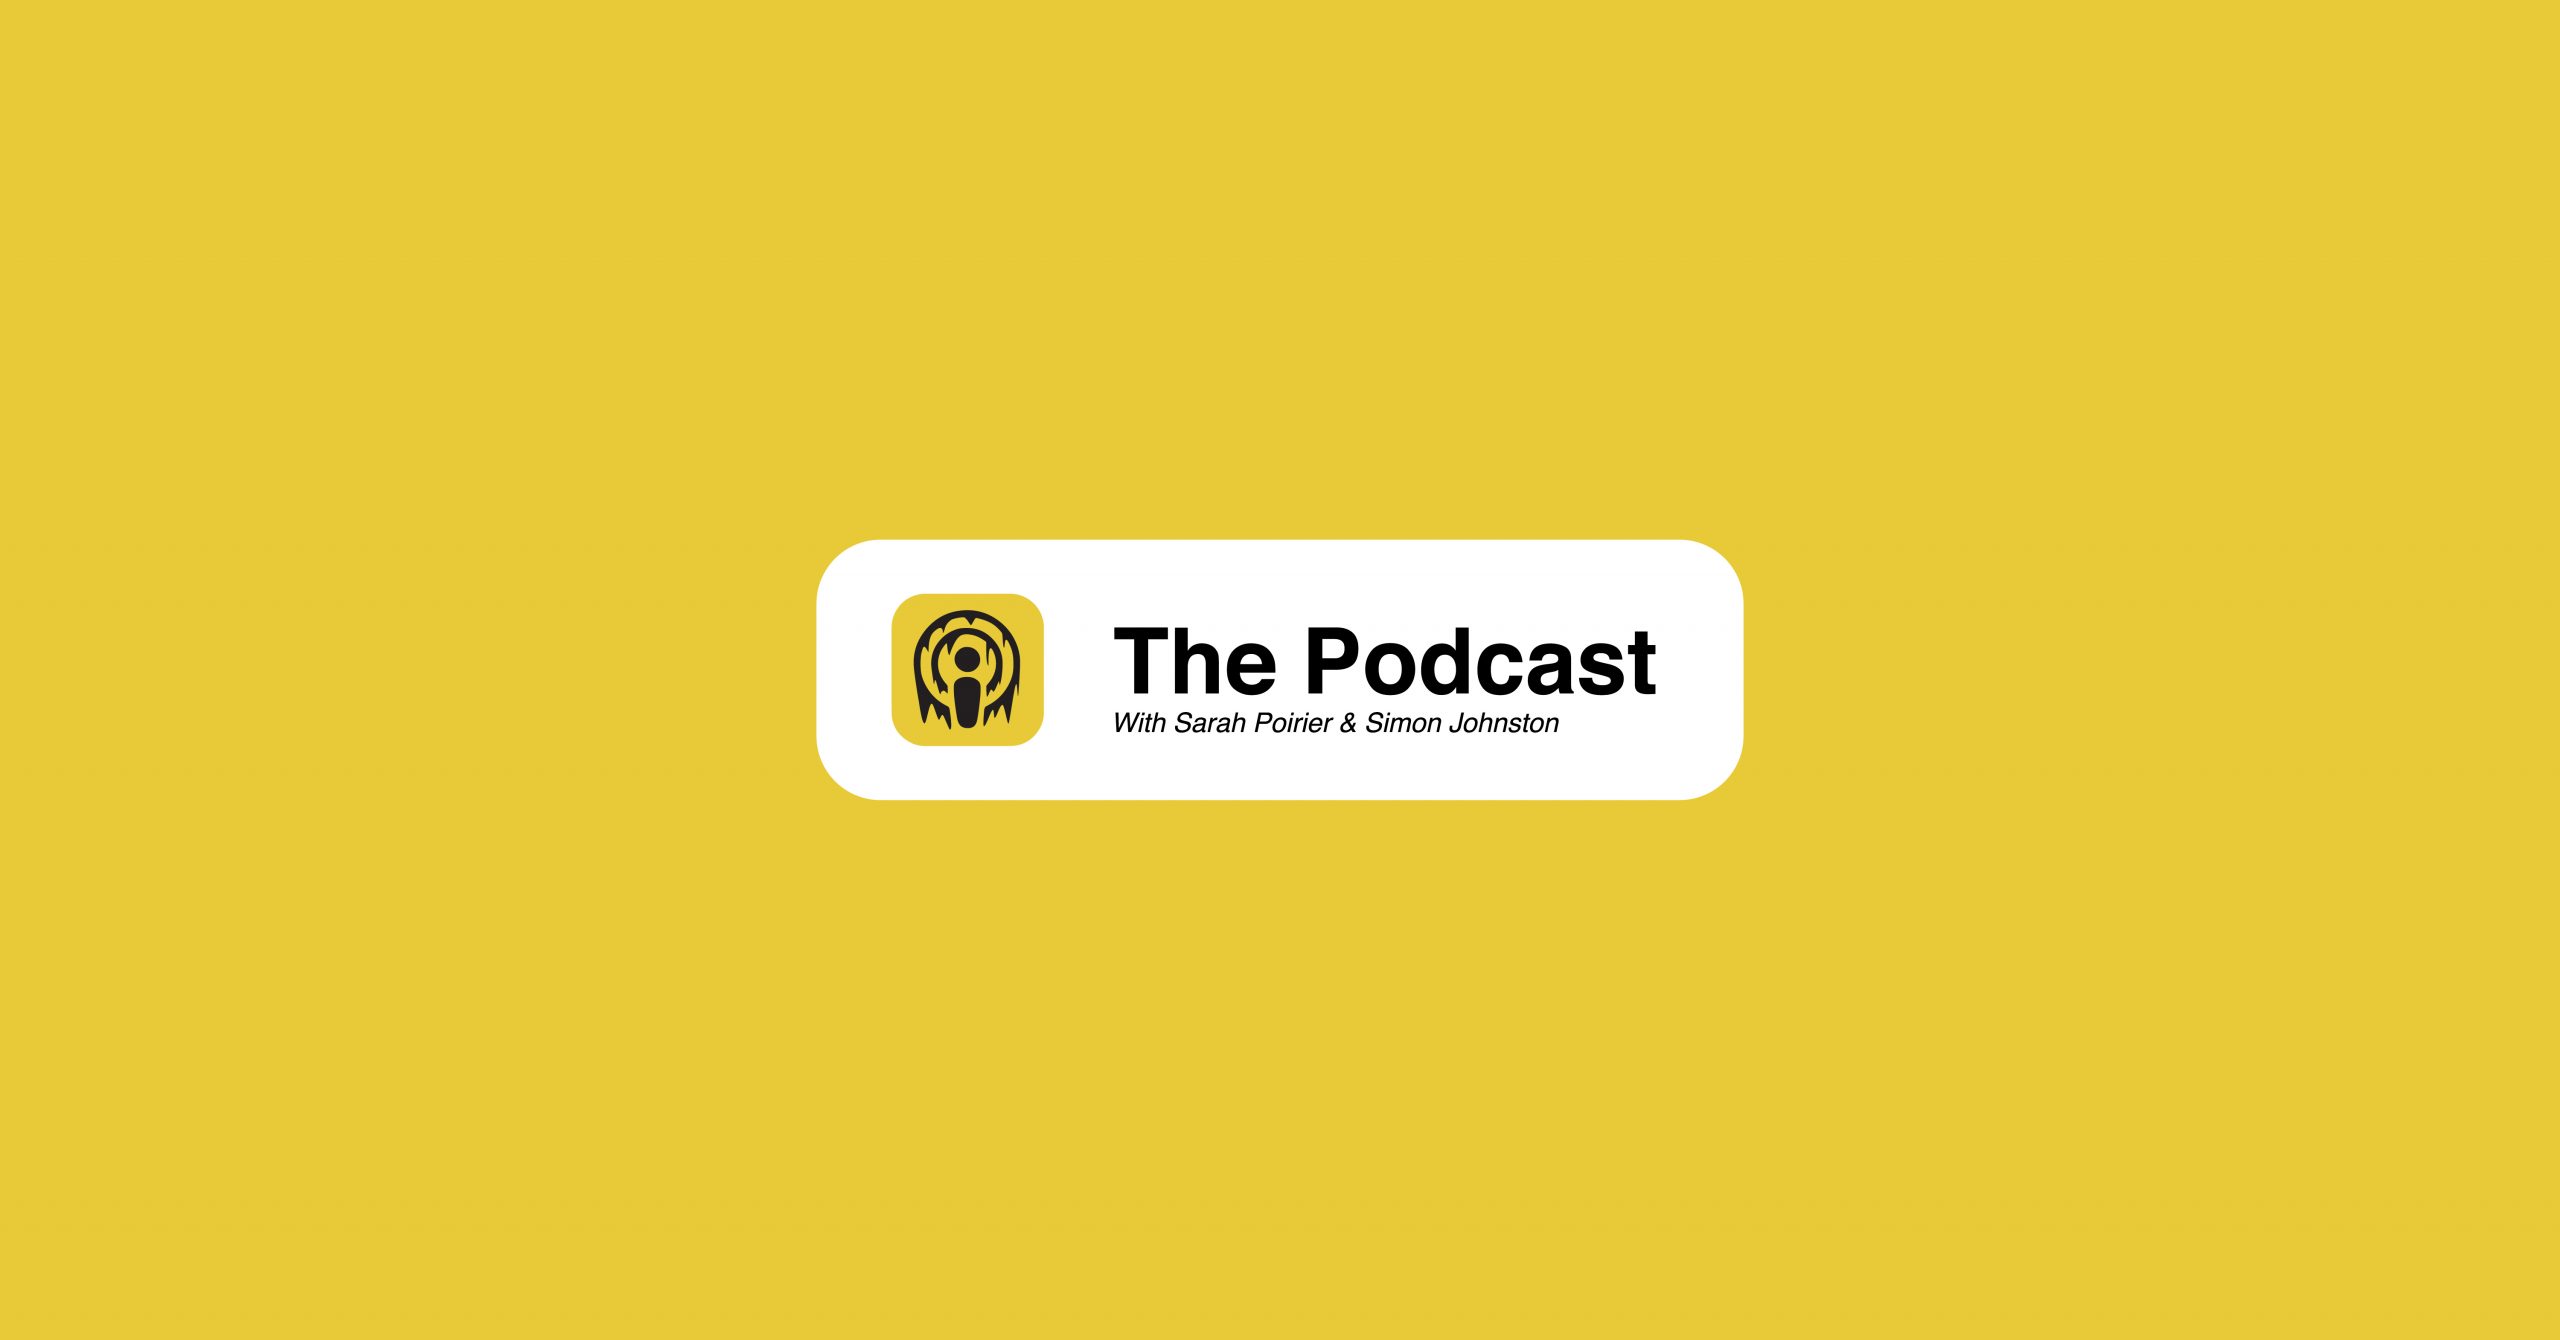 The Podcast